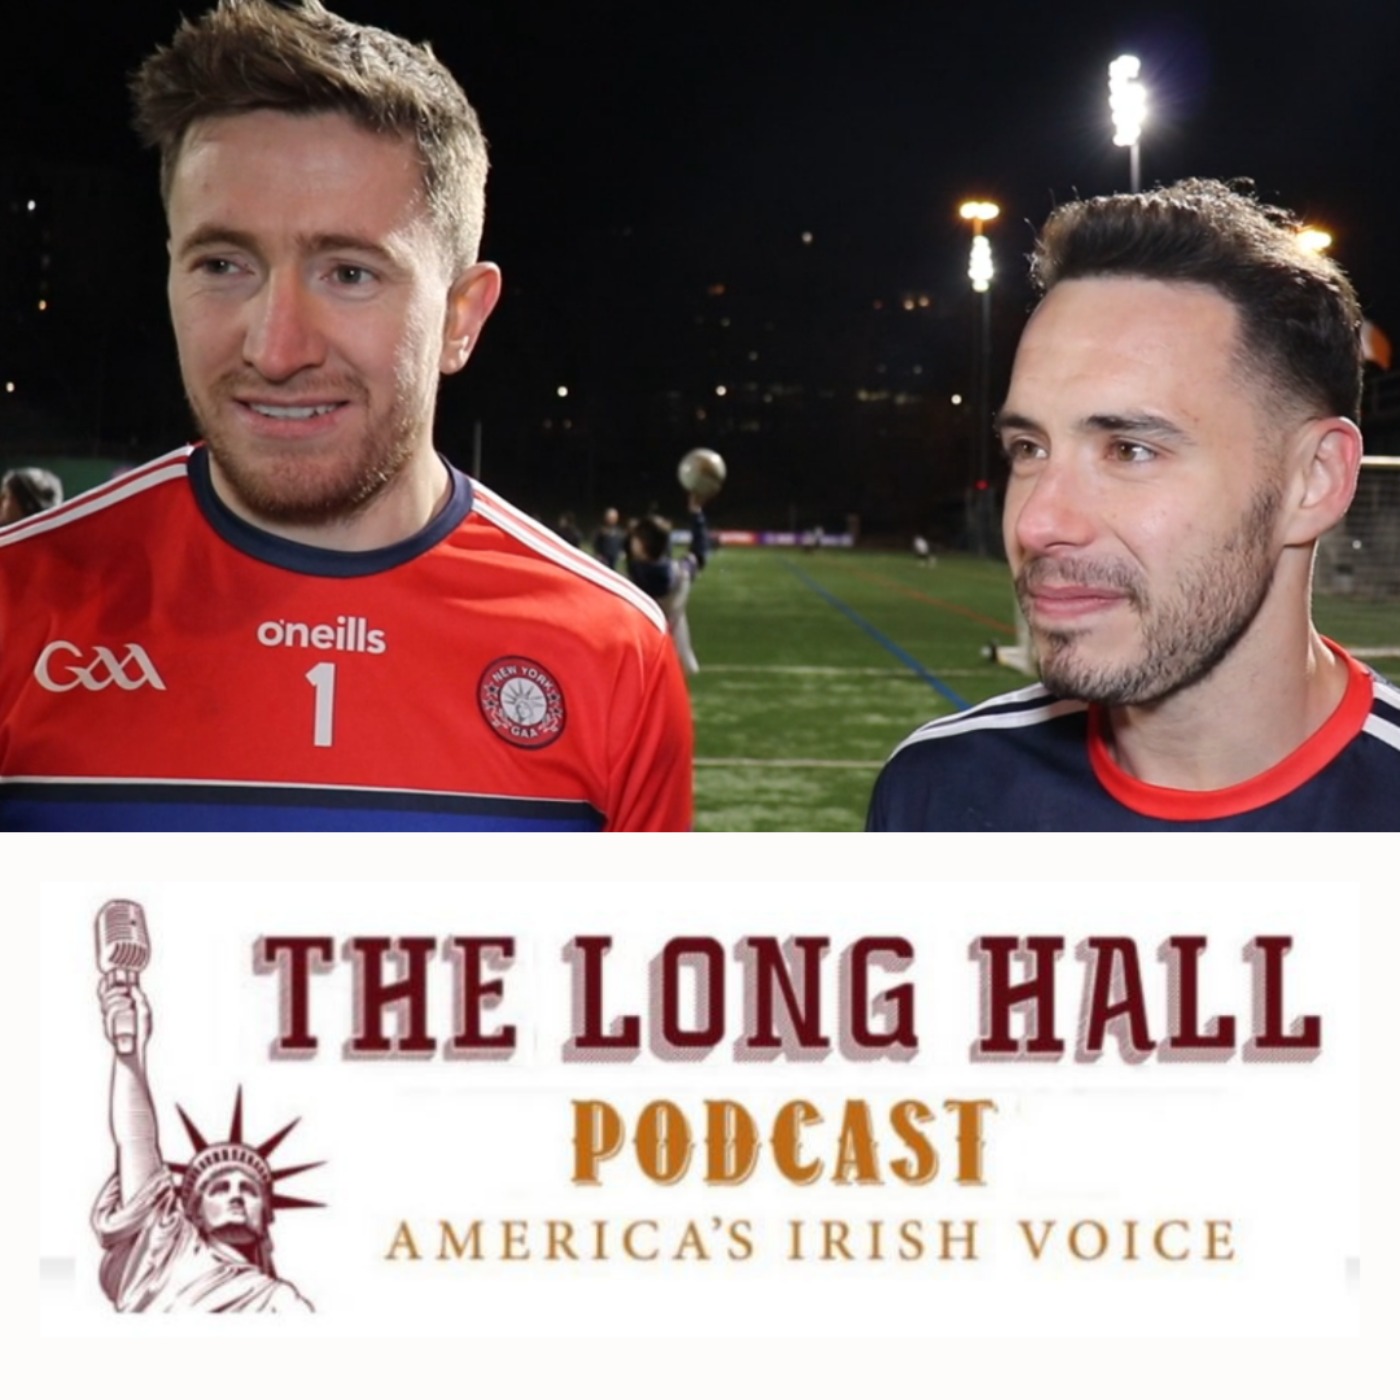 New York's Historic win over Leitrim: Shane Carthy and Mick Cunningham post-match interviews